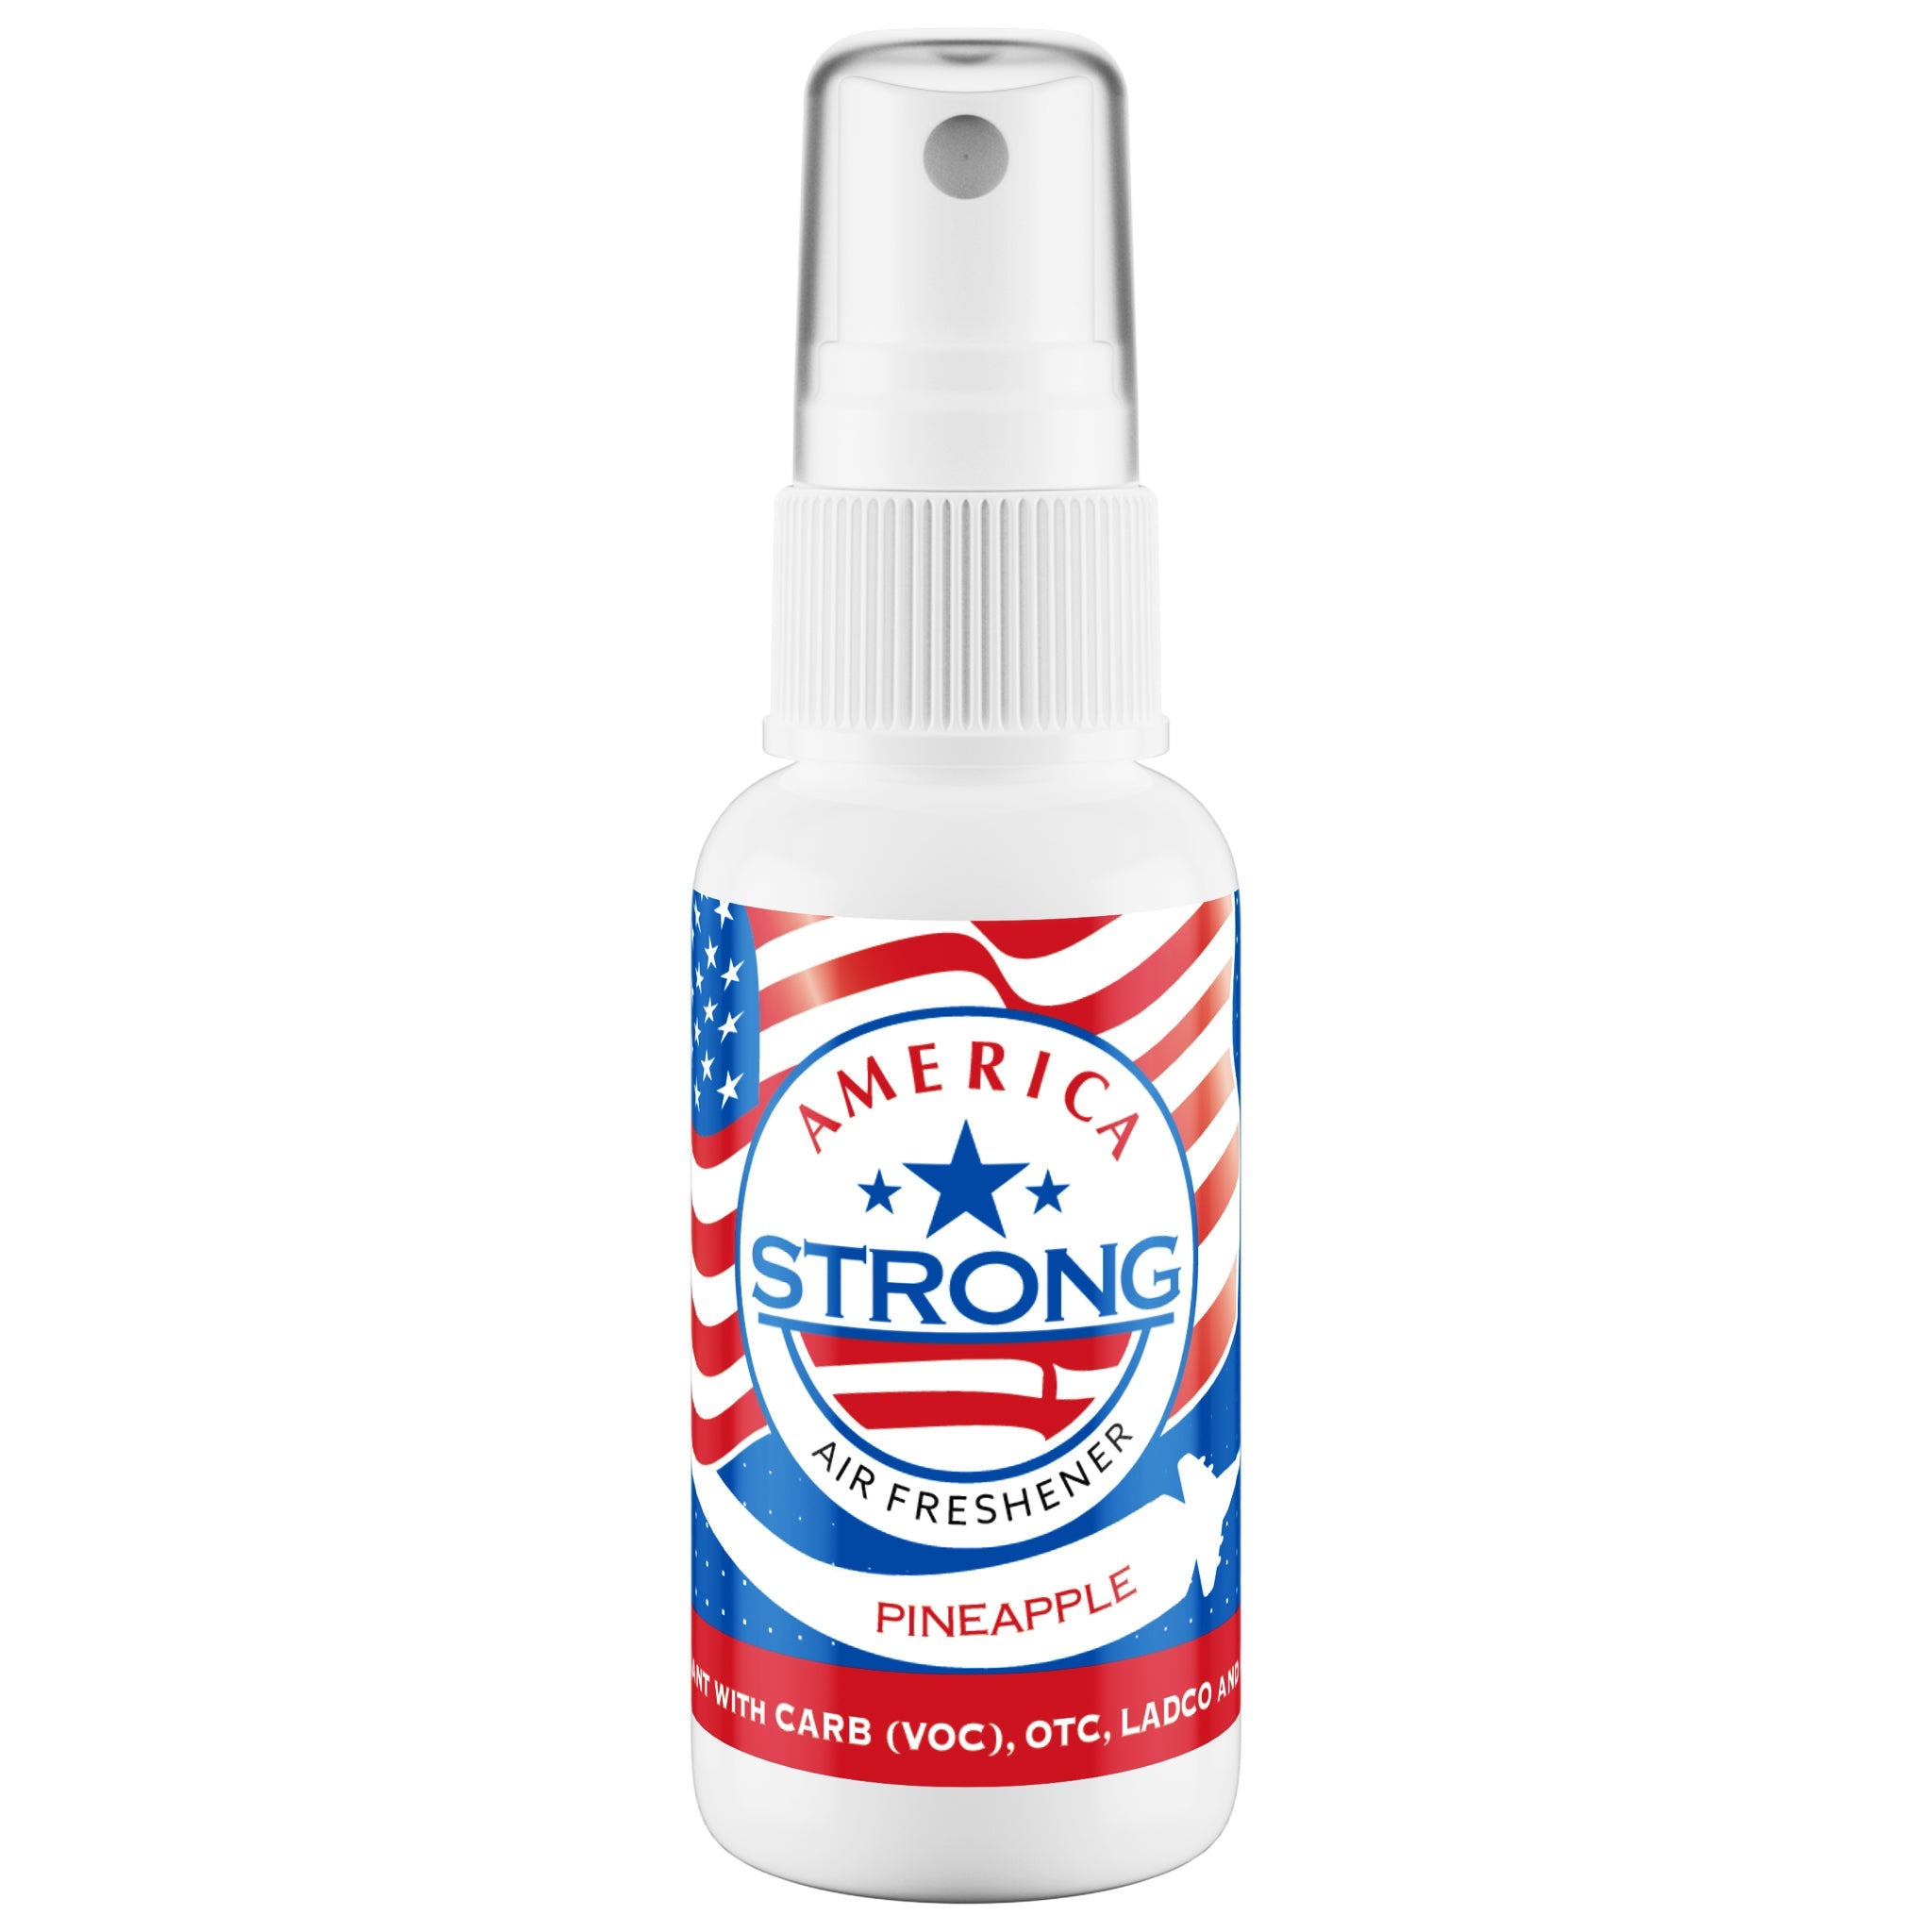 America Strong Air Freshener - Pineapple Scent